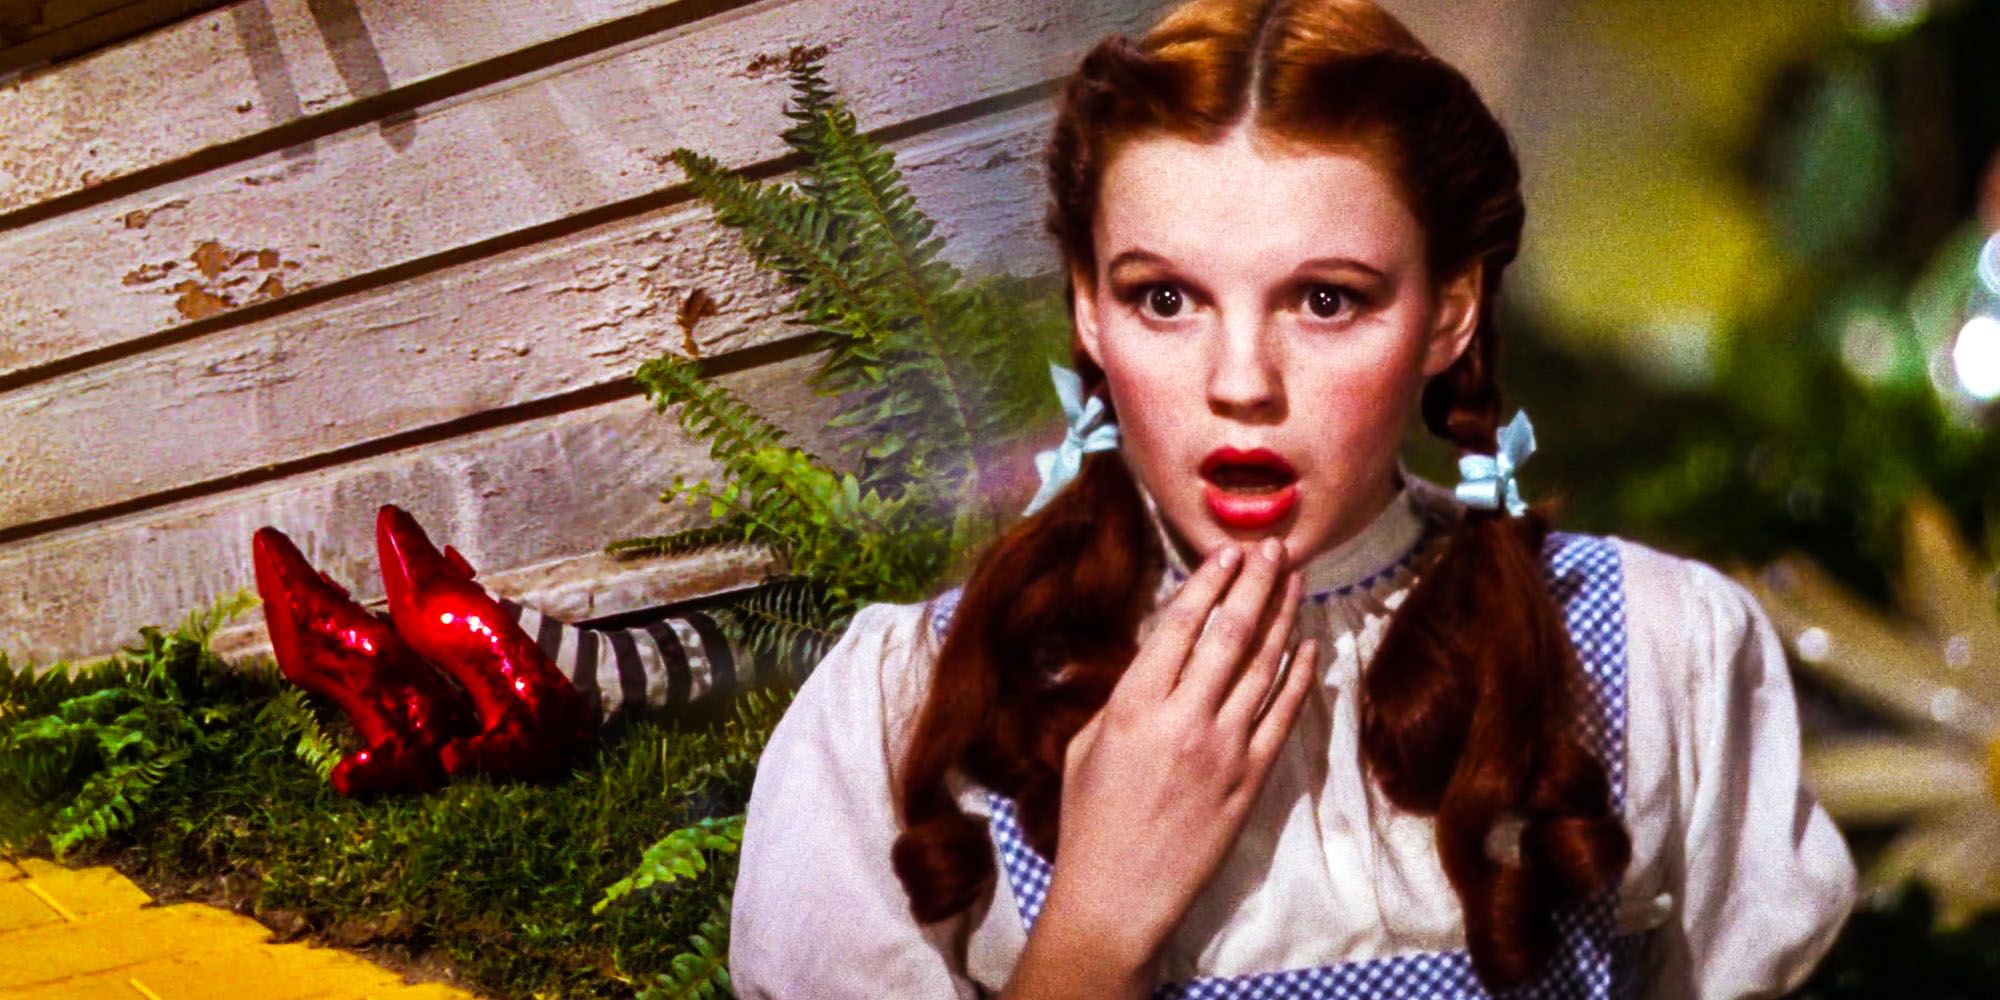 The Wizard Of Oz: Dorothy Is The Wicked Witch Of The East - Theory Explained